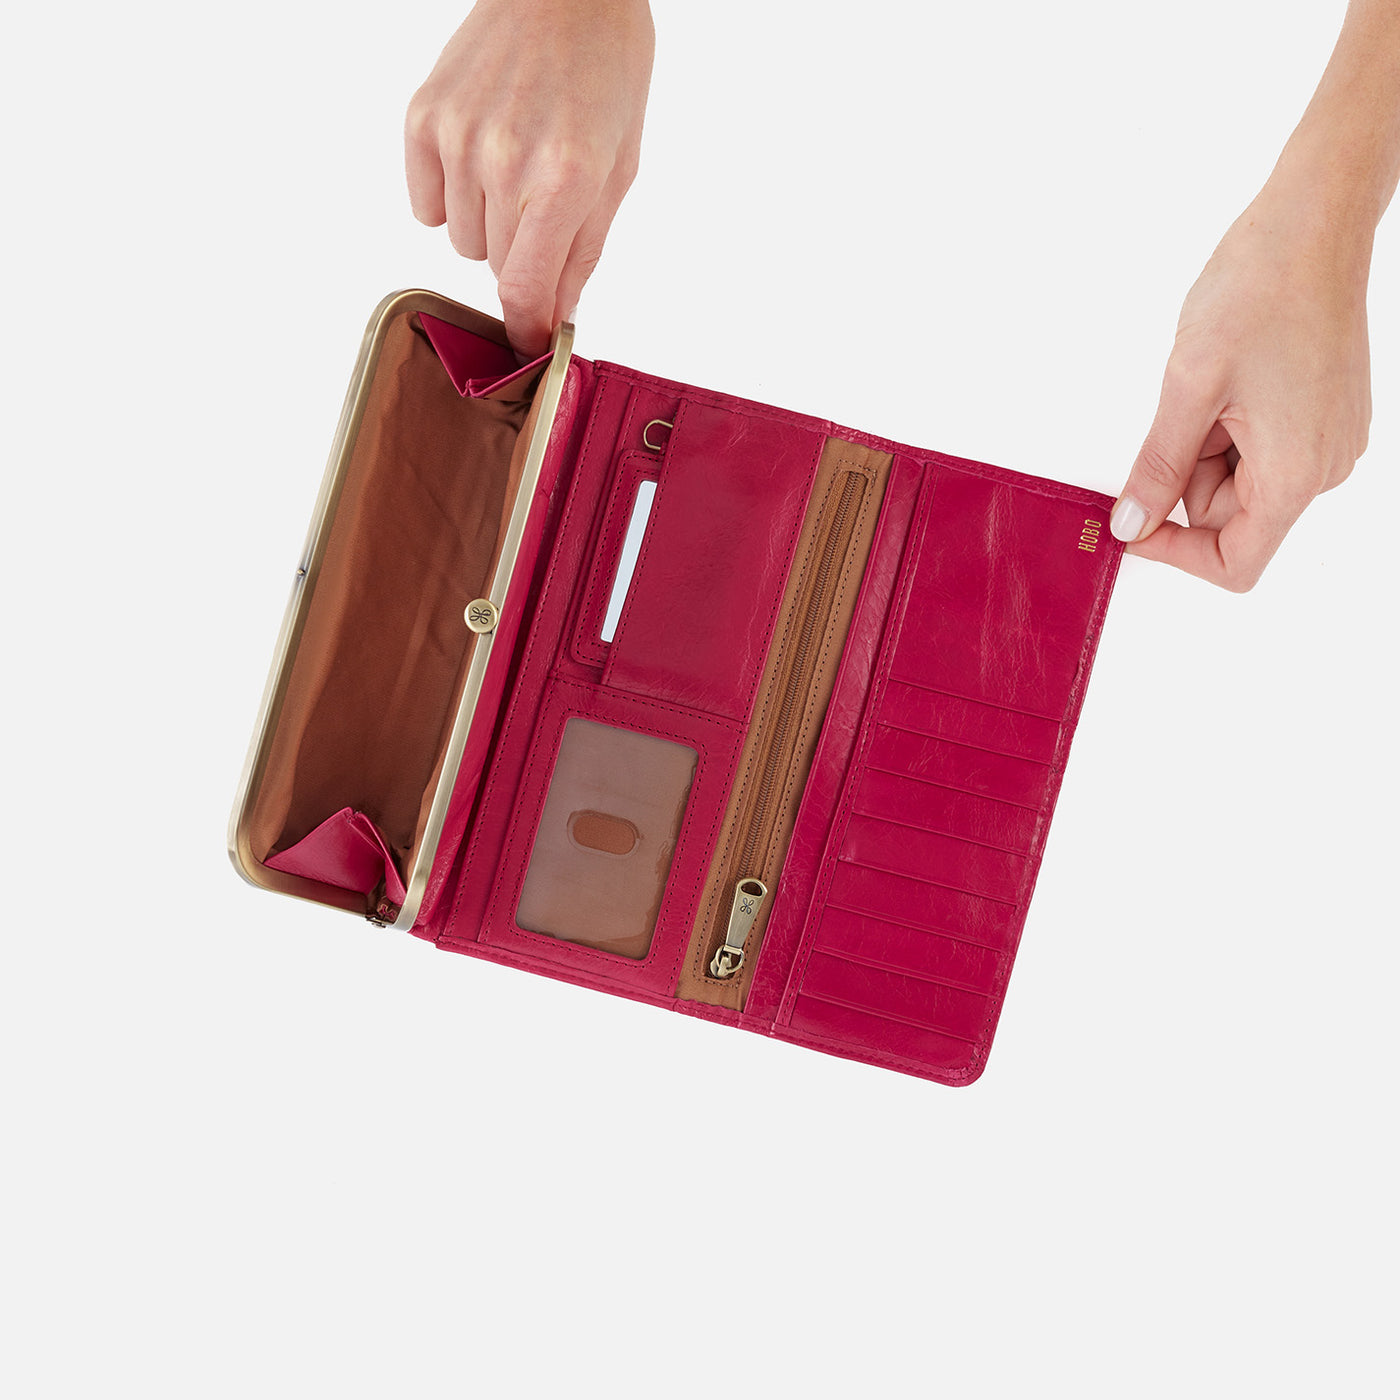 Rachel Debossed Continental Wallet in Polished Leather - Fuchsia